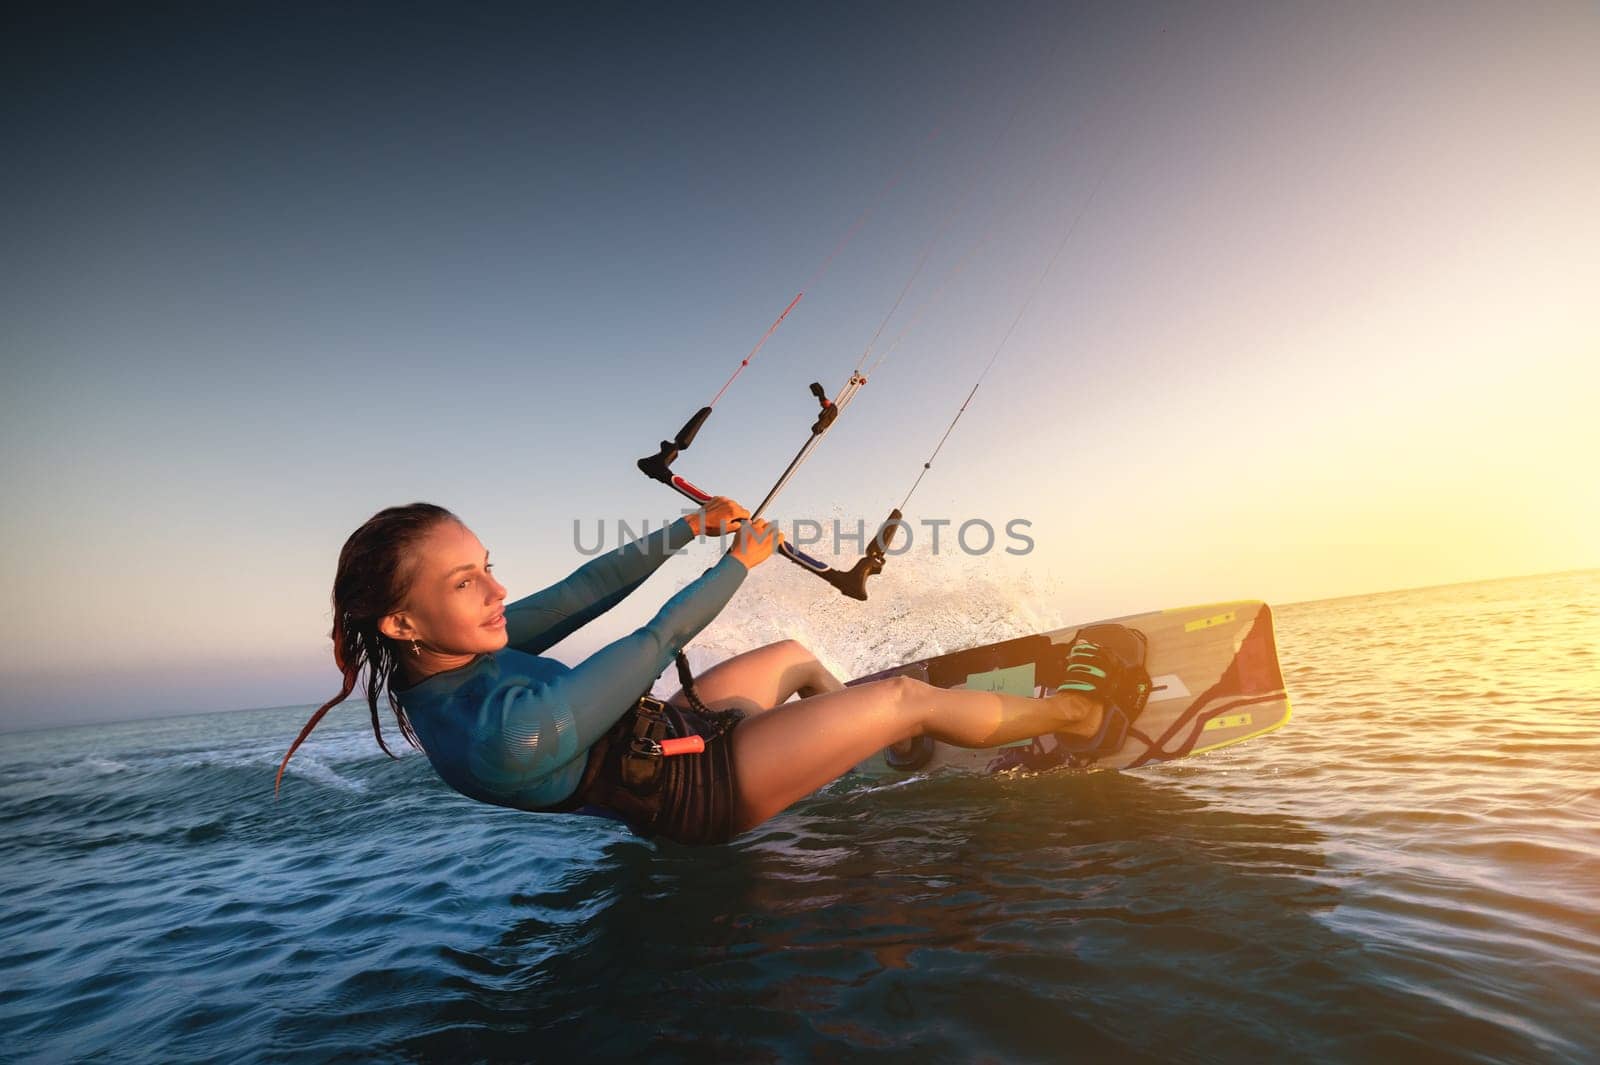 Girl kitesurfing in a sexy hydrosuit with a kite in the sky on board in the blue sea, riding on the water waves. Recreational activities, water sports, activities by yanik88